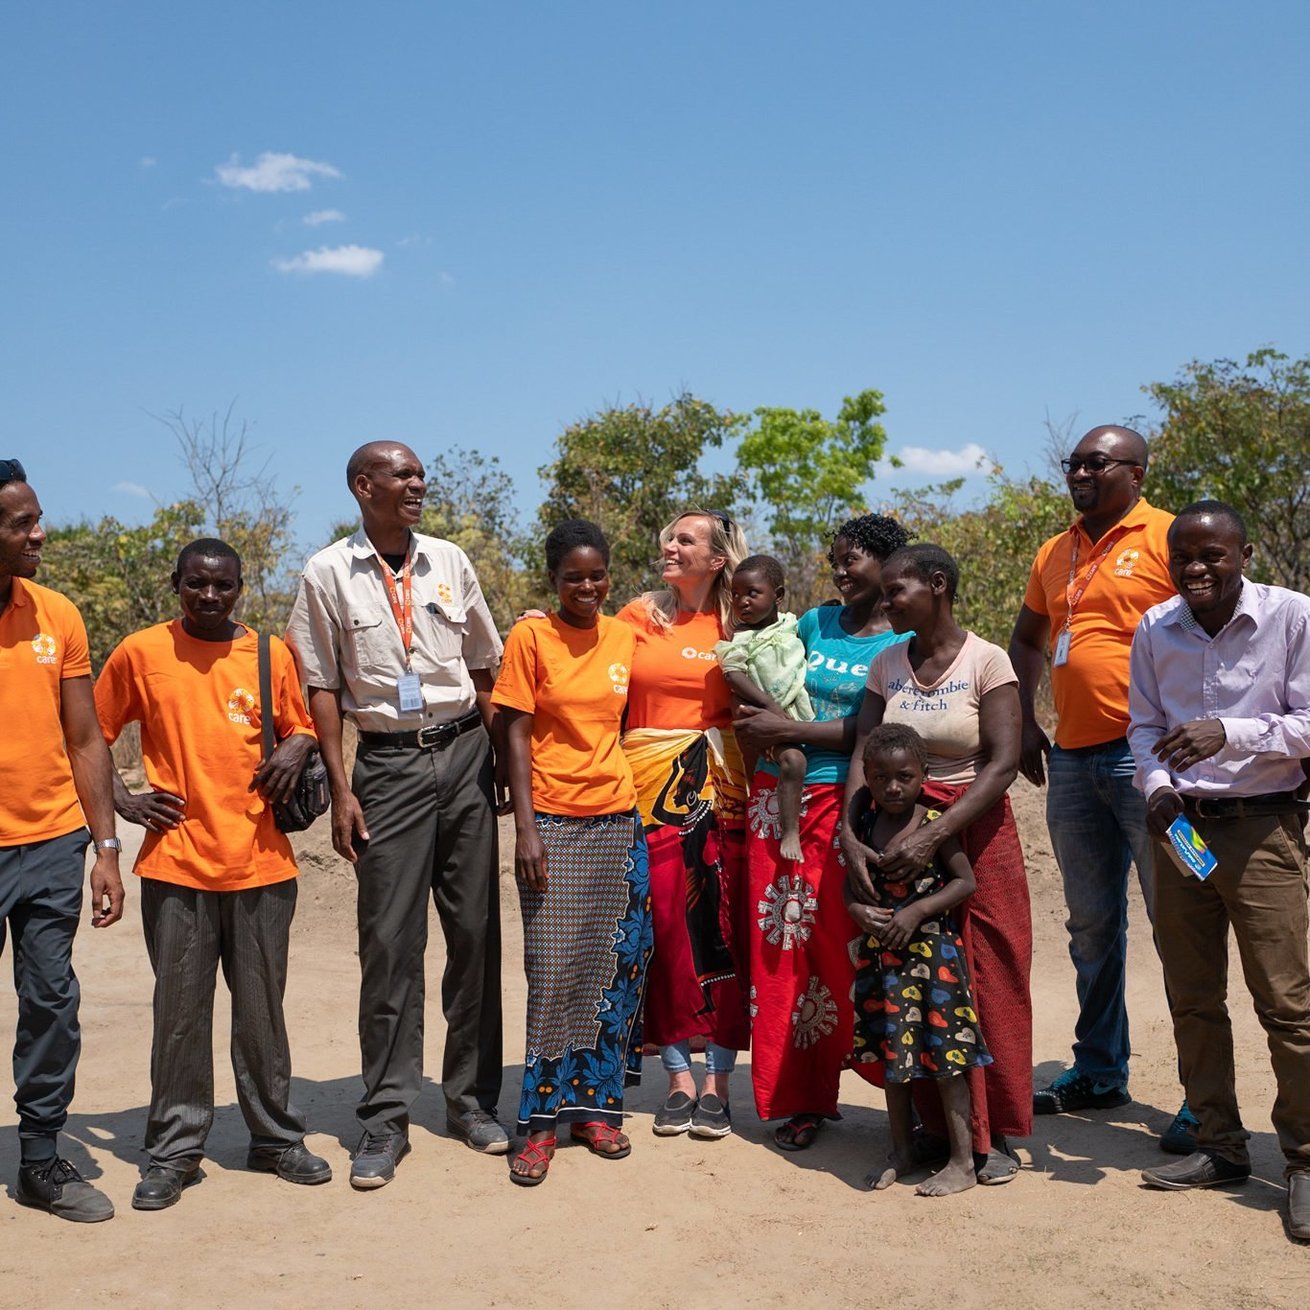 <ul>
 <li><span style="font-size:11pt">From September 20 to October, 15, 2018, the CARE Canada Knowledge Translation &amp; Public Engagement Officer (Tanja Kisslinger) traveled with two external, videographer consultants to Malawi, Mozambique and Zambia (the three SANI project countries). This was the first (of three, planned) resource allocation trips to support the SANI public engagement campaign (i.e. Feed Her Future). The Feed Her Future campaign is running in Canada from June 2018 to September 2020 (see: www.feedherfuture.ca). The overall goal of this trip was to collect a first round of (baseline) videographic and photographic footage showing the SANI project on the ground in all three countries. The videographers will spin the footage they collect into various deliverables that will be part of the public engagement campaign in Canada. </span></li>
 <li><span style="font-size:11pt">In each country, the goals were to:</span>
 <ul style="list-style-type:circle">
 <li><span style="font-size:11pt">Collect key, inaugural footage, both video and photographic, which can be used in Year 1 of the campaign to show SANI in practice;</span></li>
 <li><span style="font-size:11pt">Collect human-interest stories, quotes, photos and video which demonstrate SANI project activities and progress to date.</span></li>
 </ul>
 </li>
 <li><span style="font-size:11pt">This specific set of photos was collected during 4 days of field visits in Zambia. Specifically, the photos show:</span>
 <ul style="list-style-type:circle">
 <li><span style="font-size:11pt">We visited Kanchibiya District, Mnikashi village. There we did a walking tour to see agricultural and WASH interventions put in place by SANI. That included, a local water hole (dirty, small) which had been used (and is still used by some households) but is being replaced by wells and boreholes. We ran into a local woman doing her laundry and dishes there. We also visited the backyard gardens supported by SANI and the community demonstrated the treadle (peddle) pump used for irrigation. SANI sensitizes communities to the need for gardens and the nutritious crops they support, and provides the seeds to start the gardens.</span></li>
 <li><span style="font-size:11pt">In Mnikashi we also observed as SANI trained &ldquo;Pumpminders&rdquo; repaired a borehole at a local school that had been in disrepair for 4 years. The photos show the trained, local workers successfully re-establishing water flow to a borehole that serves 50 local families, as well as all the children at the nearby school. The entire community celebrated the return of water, since it meant that many of the students would no longer miss classes because they were walking to a nearby river to collect water.</span></li>
 <li><span style="font-size:11pt">We also visited Munduwantanga village in Kanchibiya District. There, we saw a cooking demonstration, infant feeding, recipe preparations, and we observed a regular monthly check-in at a GMP (Growth and Monitoring) center. SANI supports all these interventions with knowledge, tools, training, volunteers, bicycles and more. Local staff explained that the greatest challenge of this health center was its shelter/structure &ndash; during rainy season, they must move to a nearby school.</span></li>
 <li><span style="font-size:11pt">We also visited Mukungule village in Mpika District. There we were allowed to film, interview and follow a young mother. She showed us her home, her daily routine, her cooking methods, and her family. She spoke to us about her daily life and chores, her workload, and the norms of her family and community. The photos include several shots of her with her daughter.</span></li>
 </ul>
 </li>
</ul>